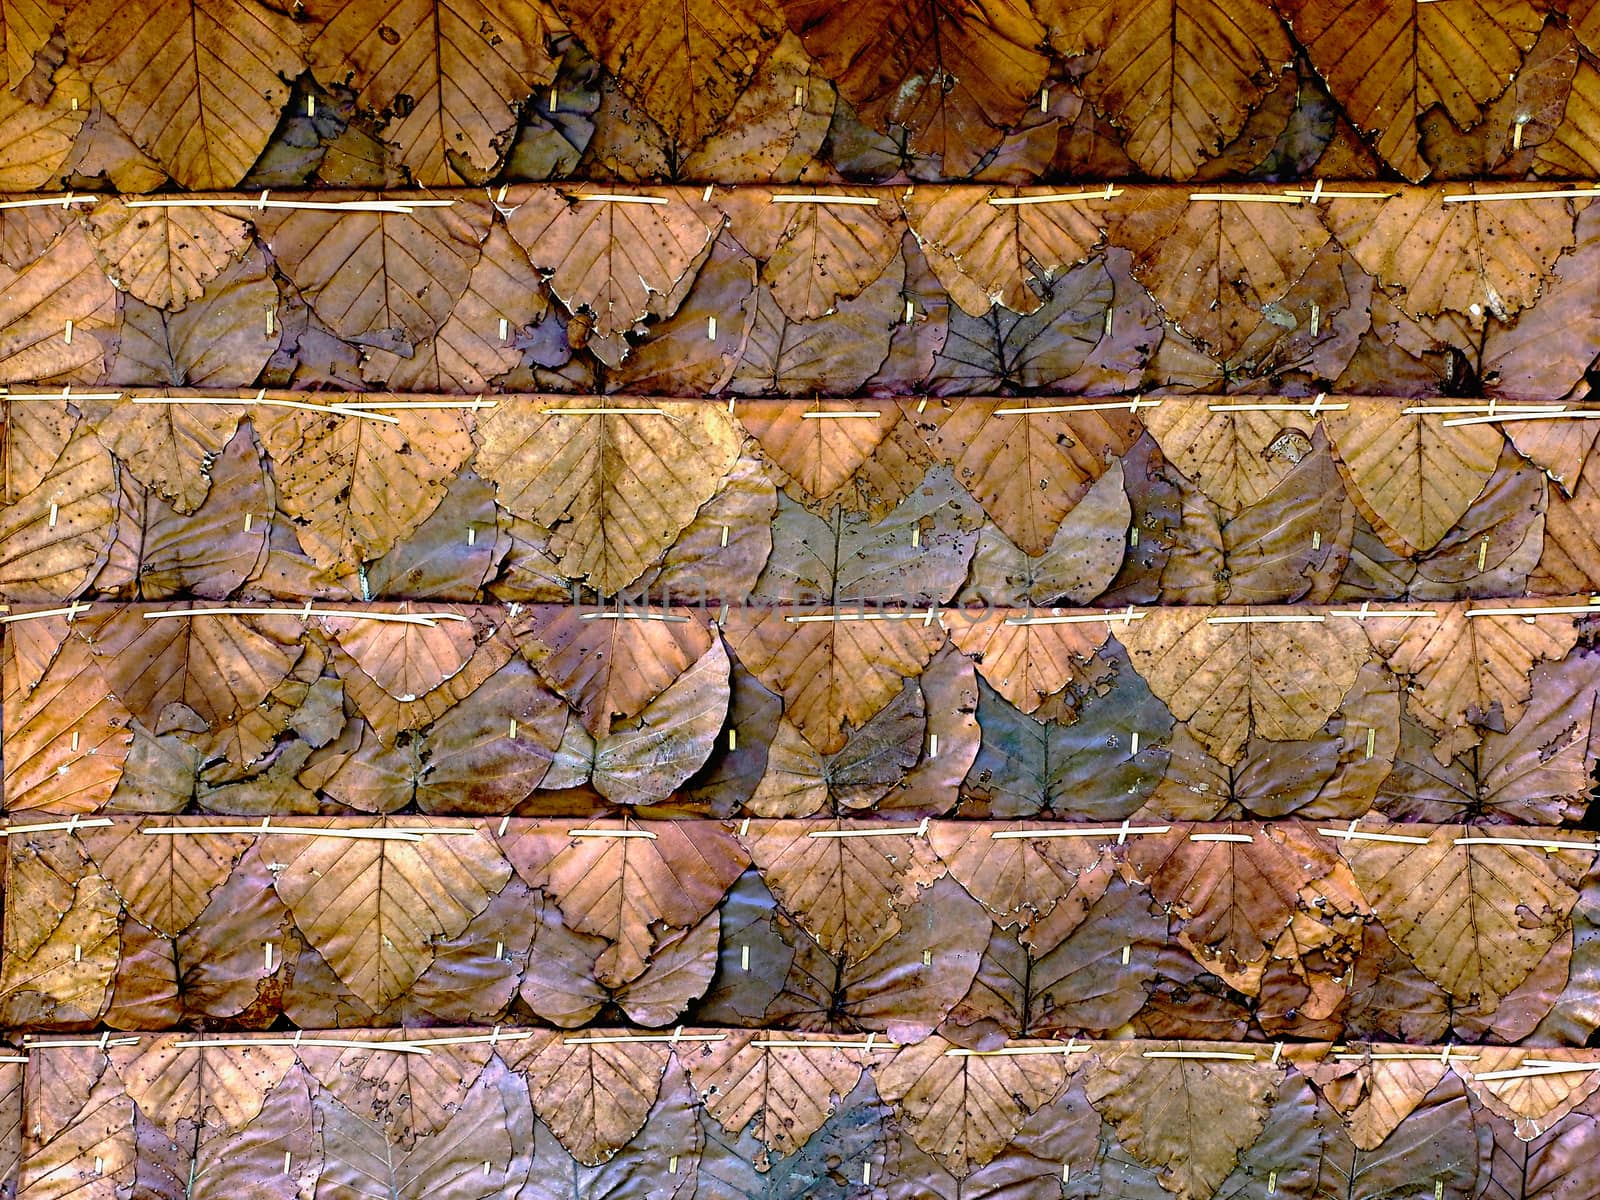 Dried Leaf Texture, haystack roof. Light and shadow.